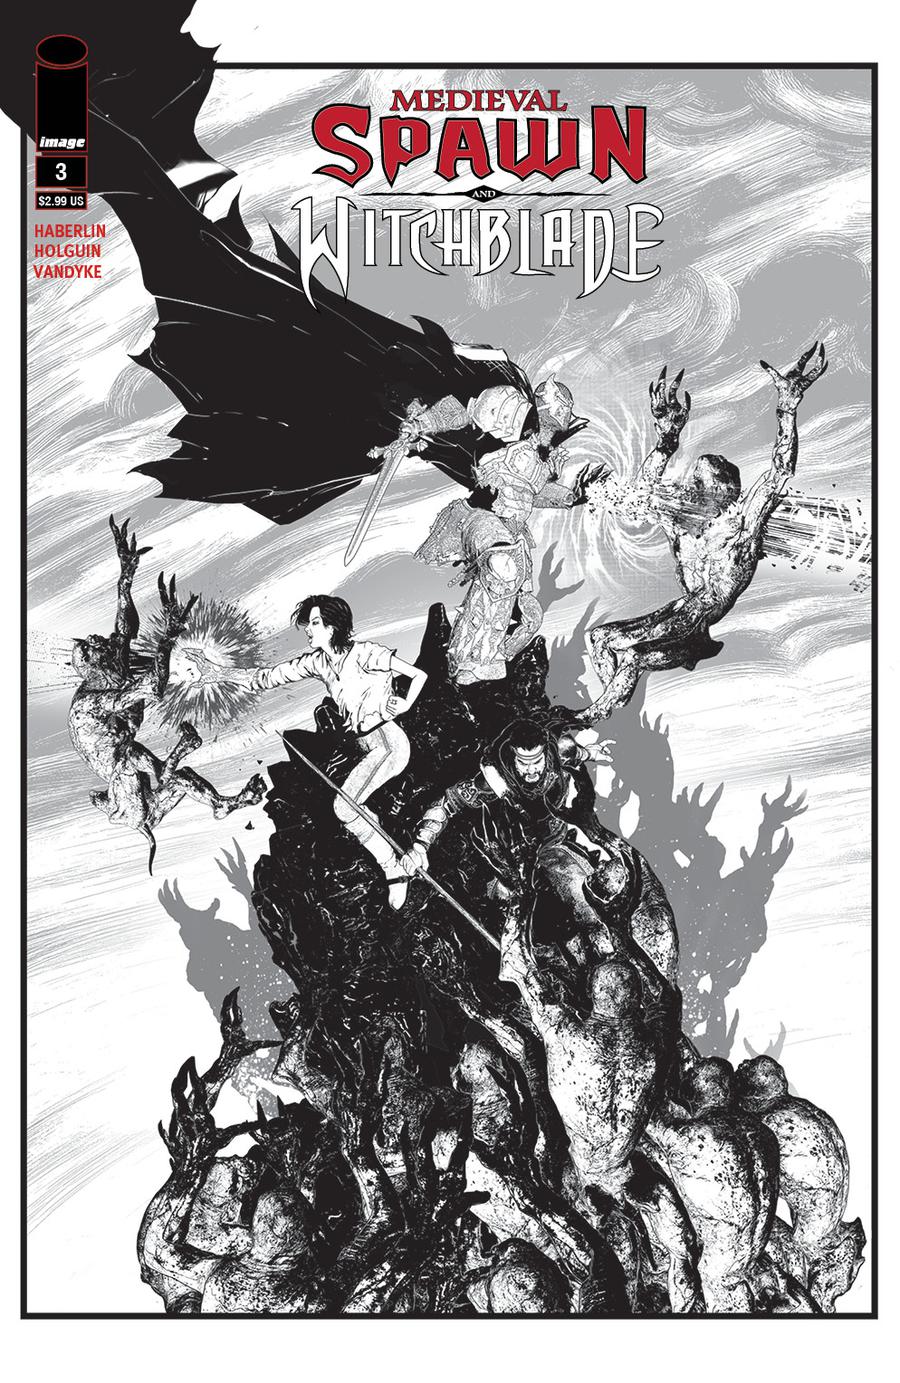 Medieval Spawn Witchblade Vol 2 #3 Cover B Variant Brian Haberlin Black & White Cover